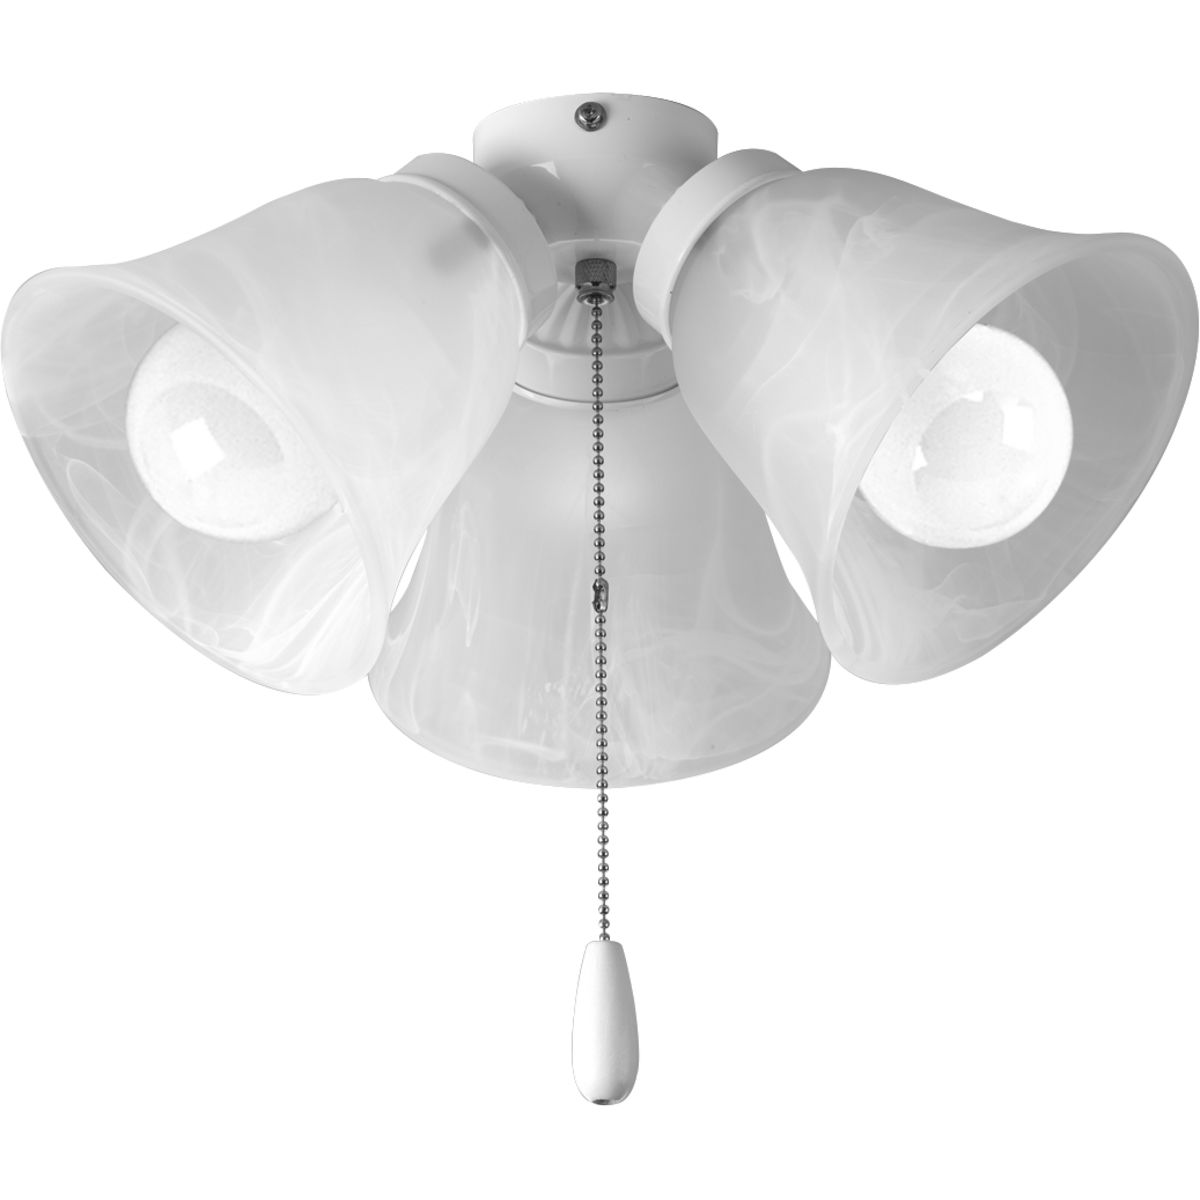 Three-light universal fan light kit features alabaster style glass shades beautiful in design. White finish corresponds with a Chrome pull-chain and white fob. Universal style for use with fans that accept an accessory light comes with quick-connect wiring. Includes three 3000K, 800 lumen each (source), Title 24 certified LED bulbs.